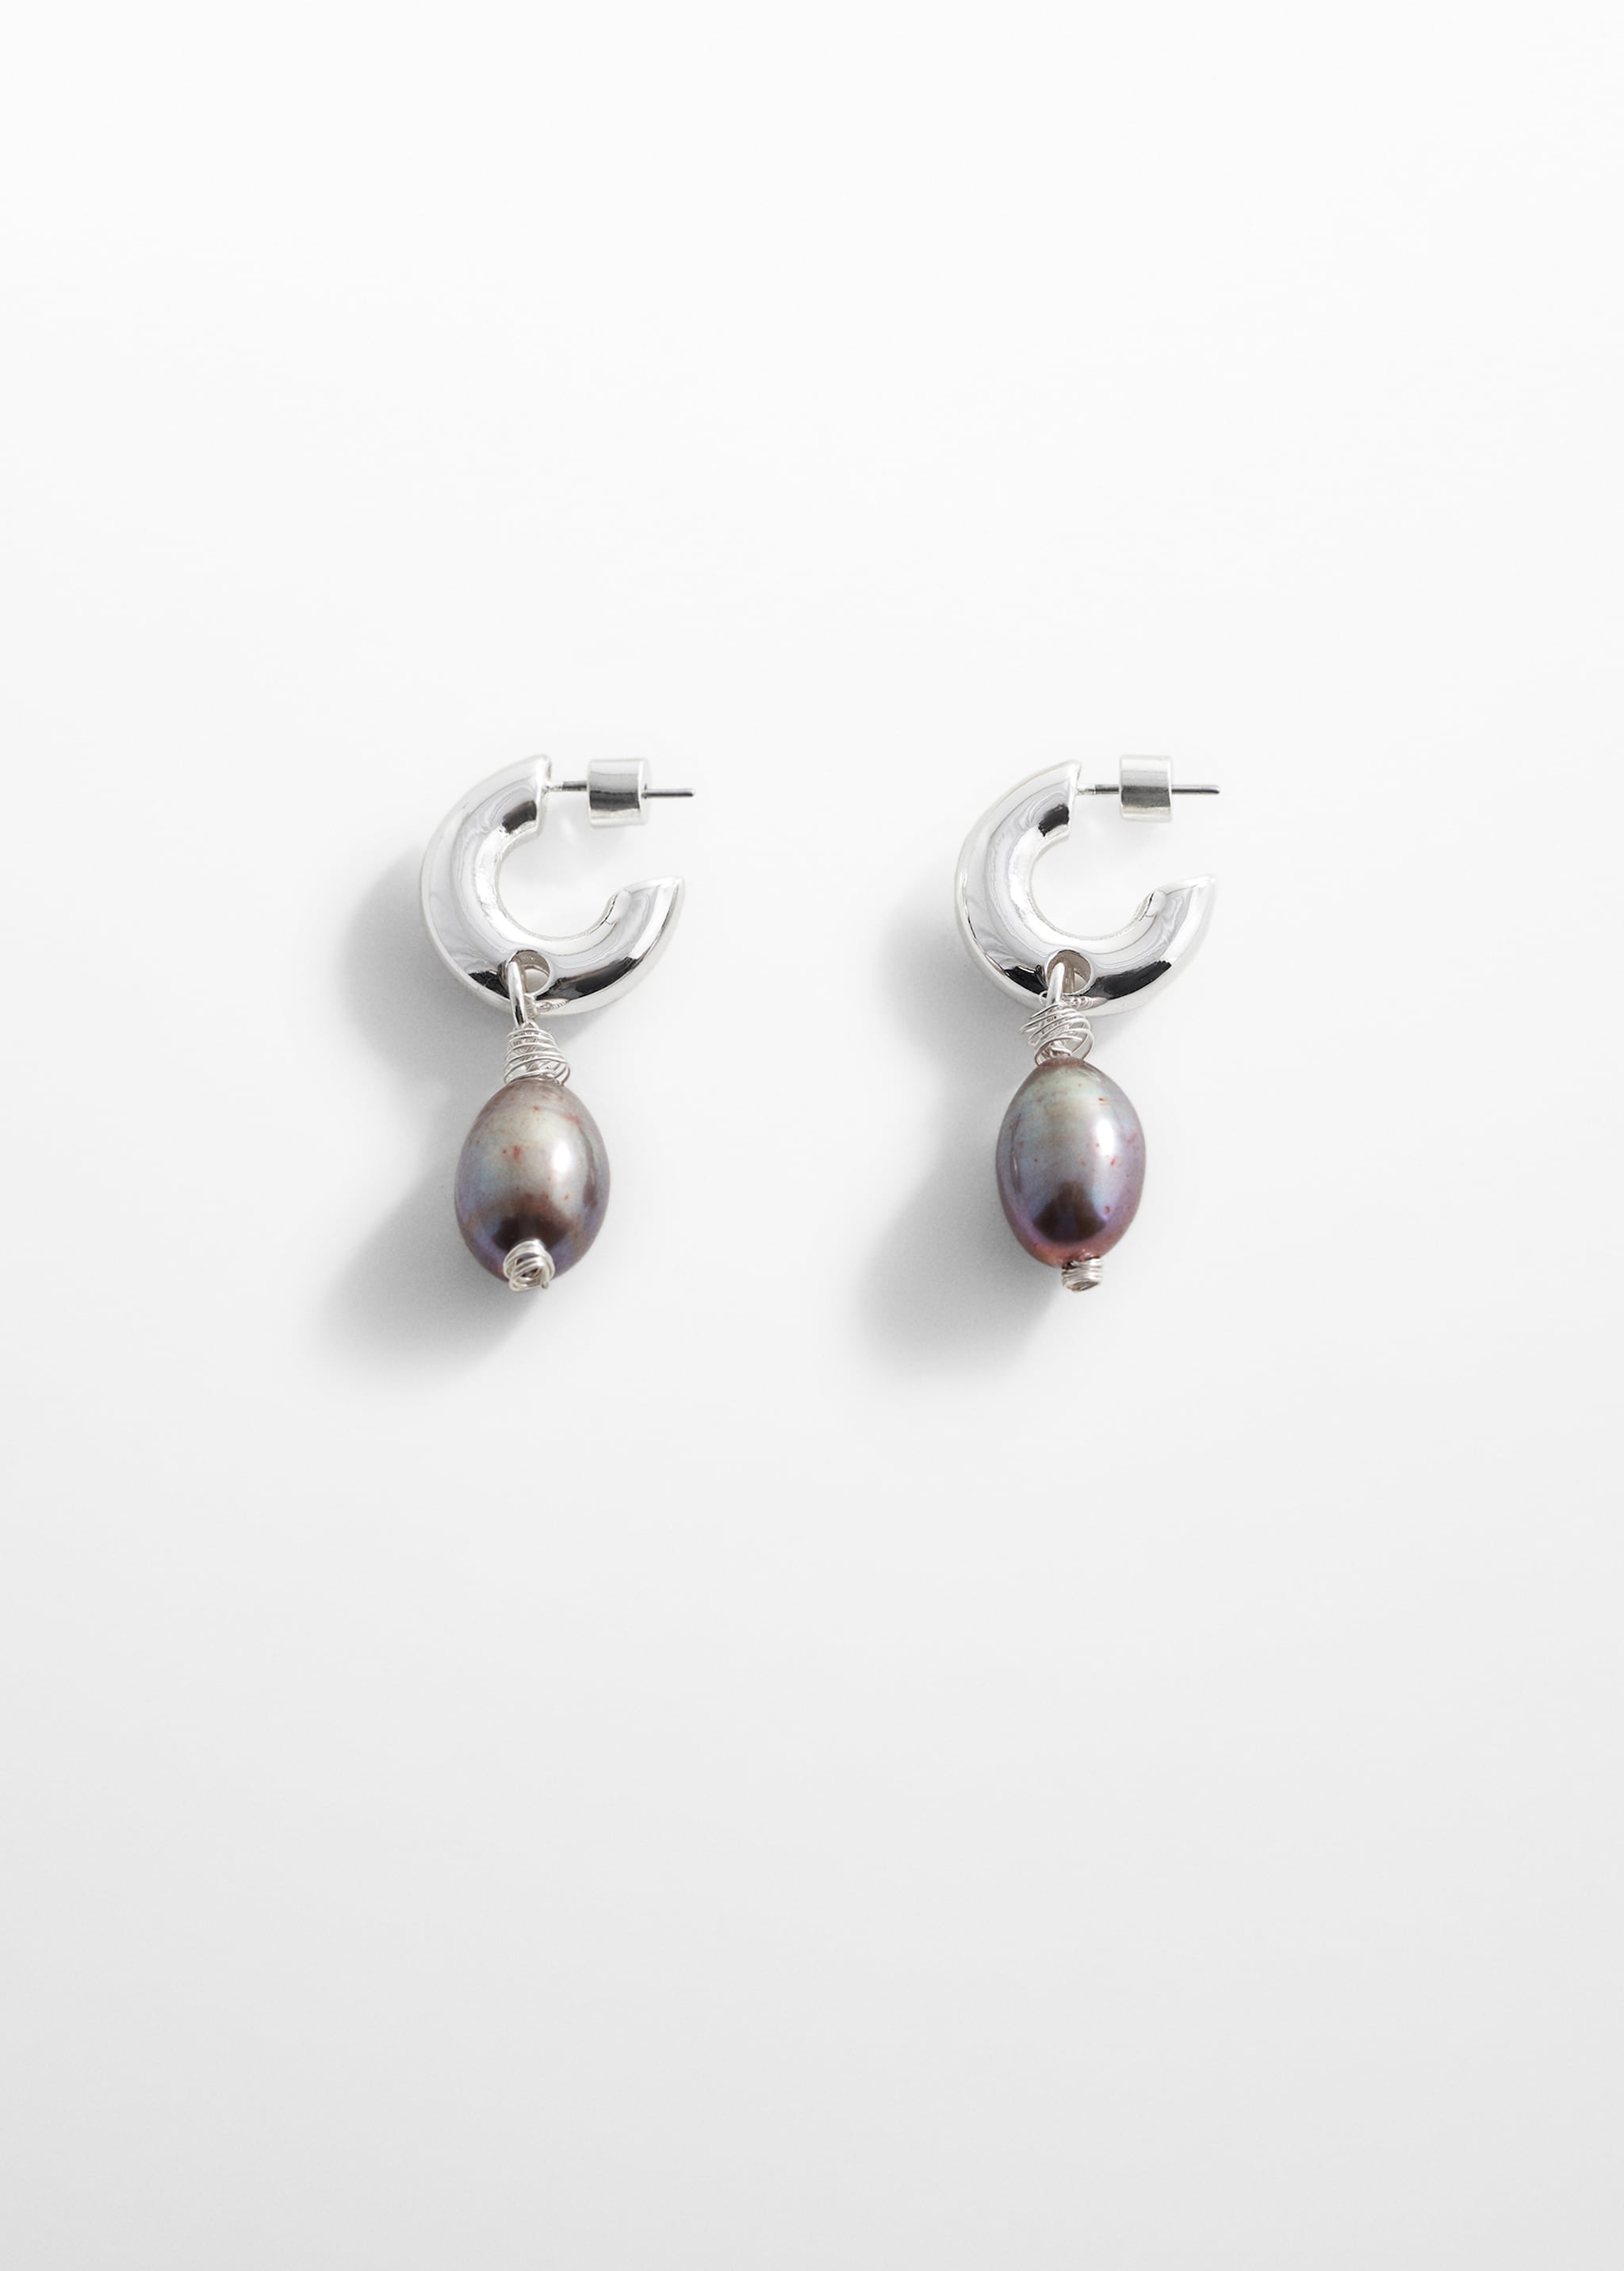 Natural pearl pendant earrings - Article without model